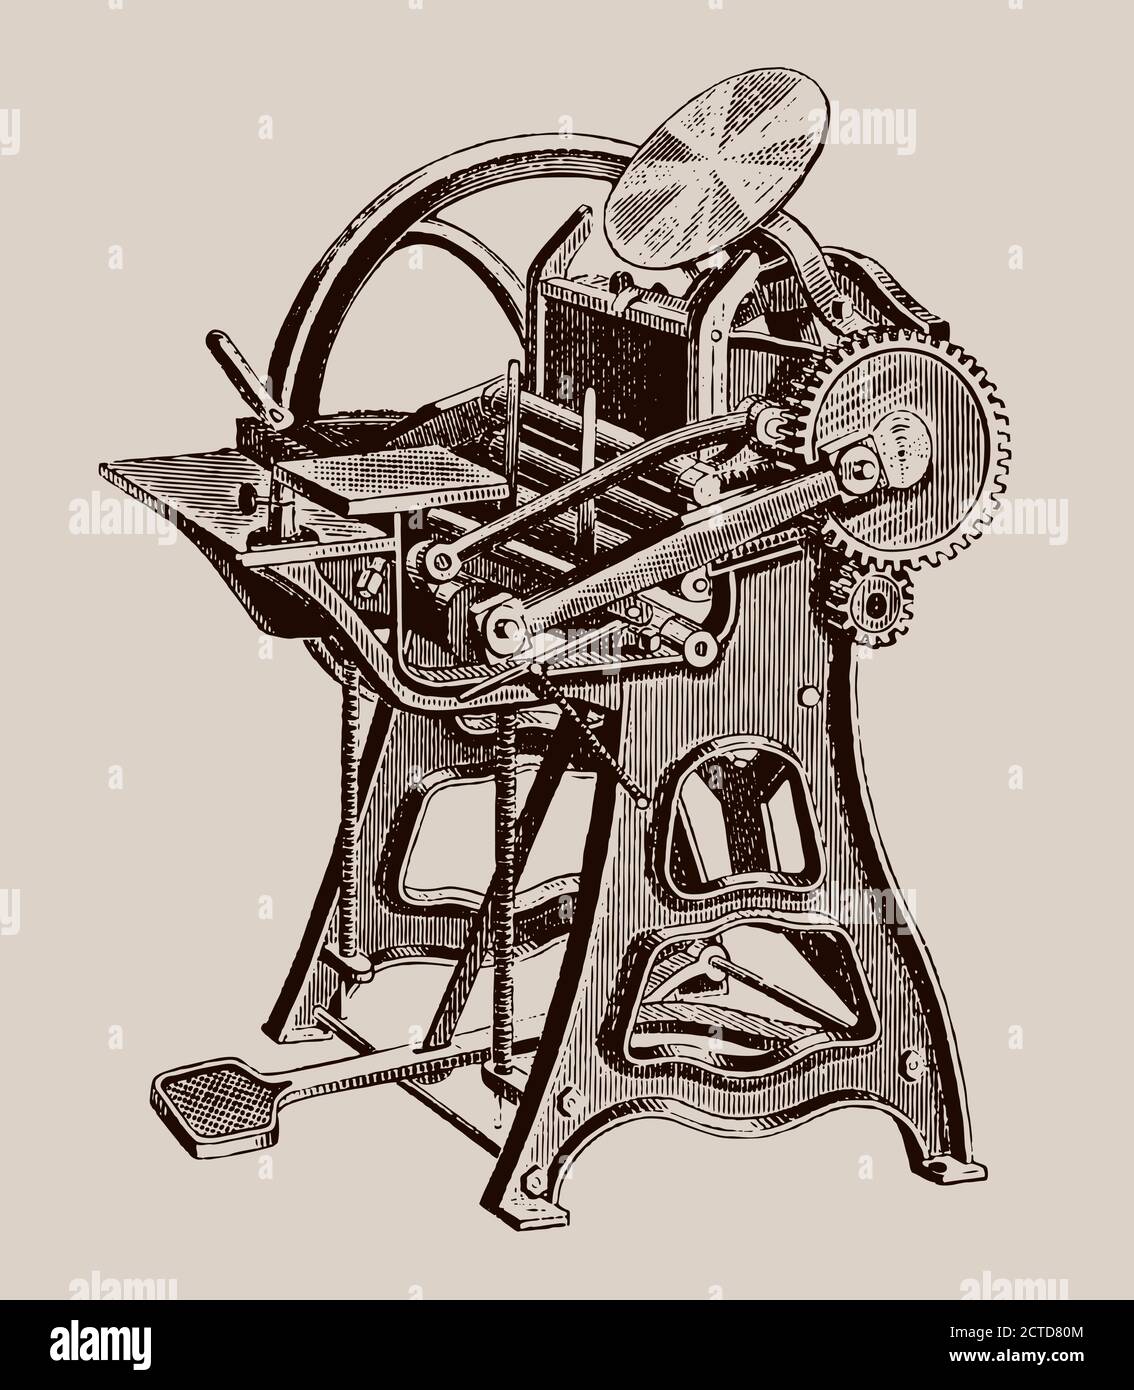 Treadle-operated 'Minerva' platen printing press made by H. S.